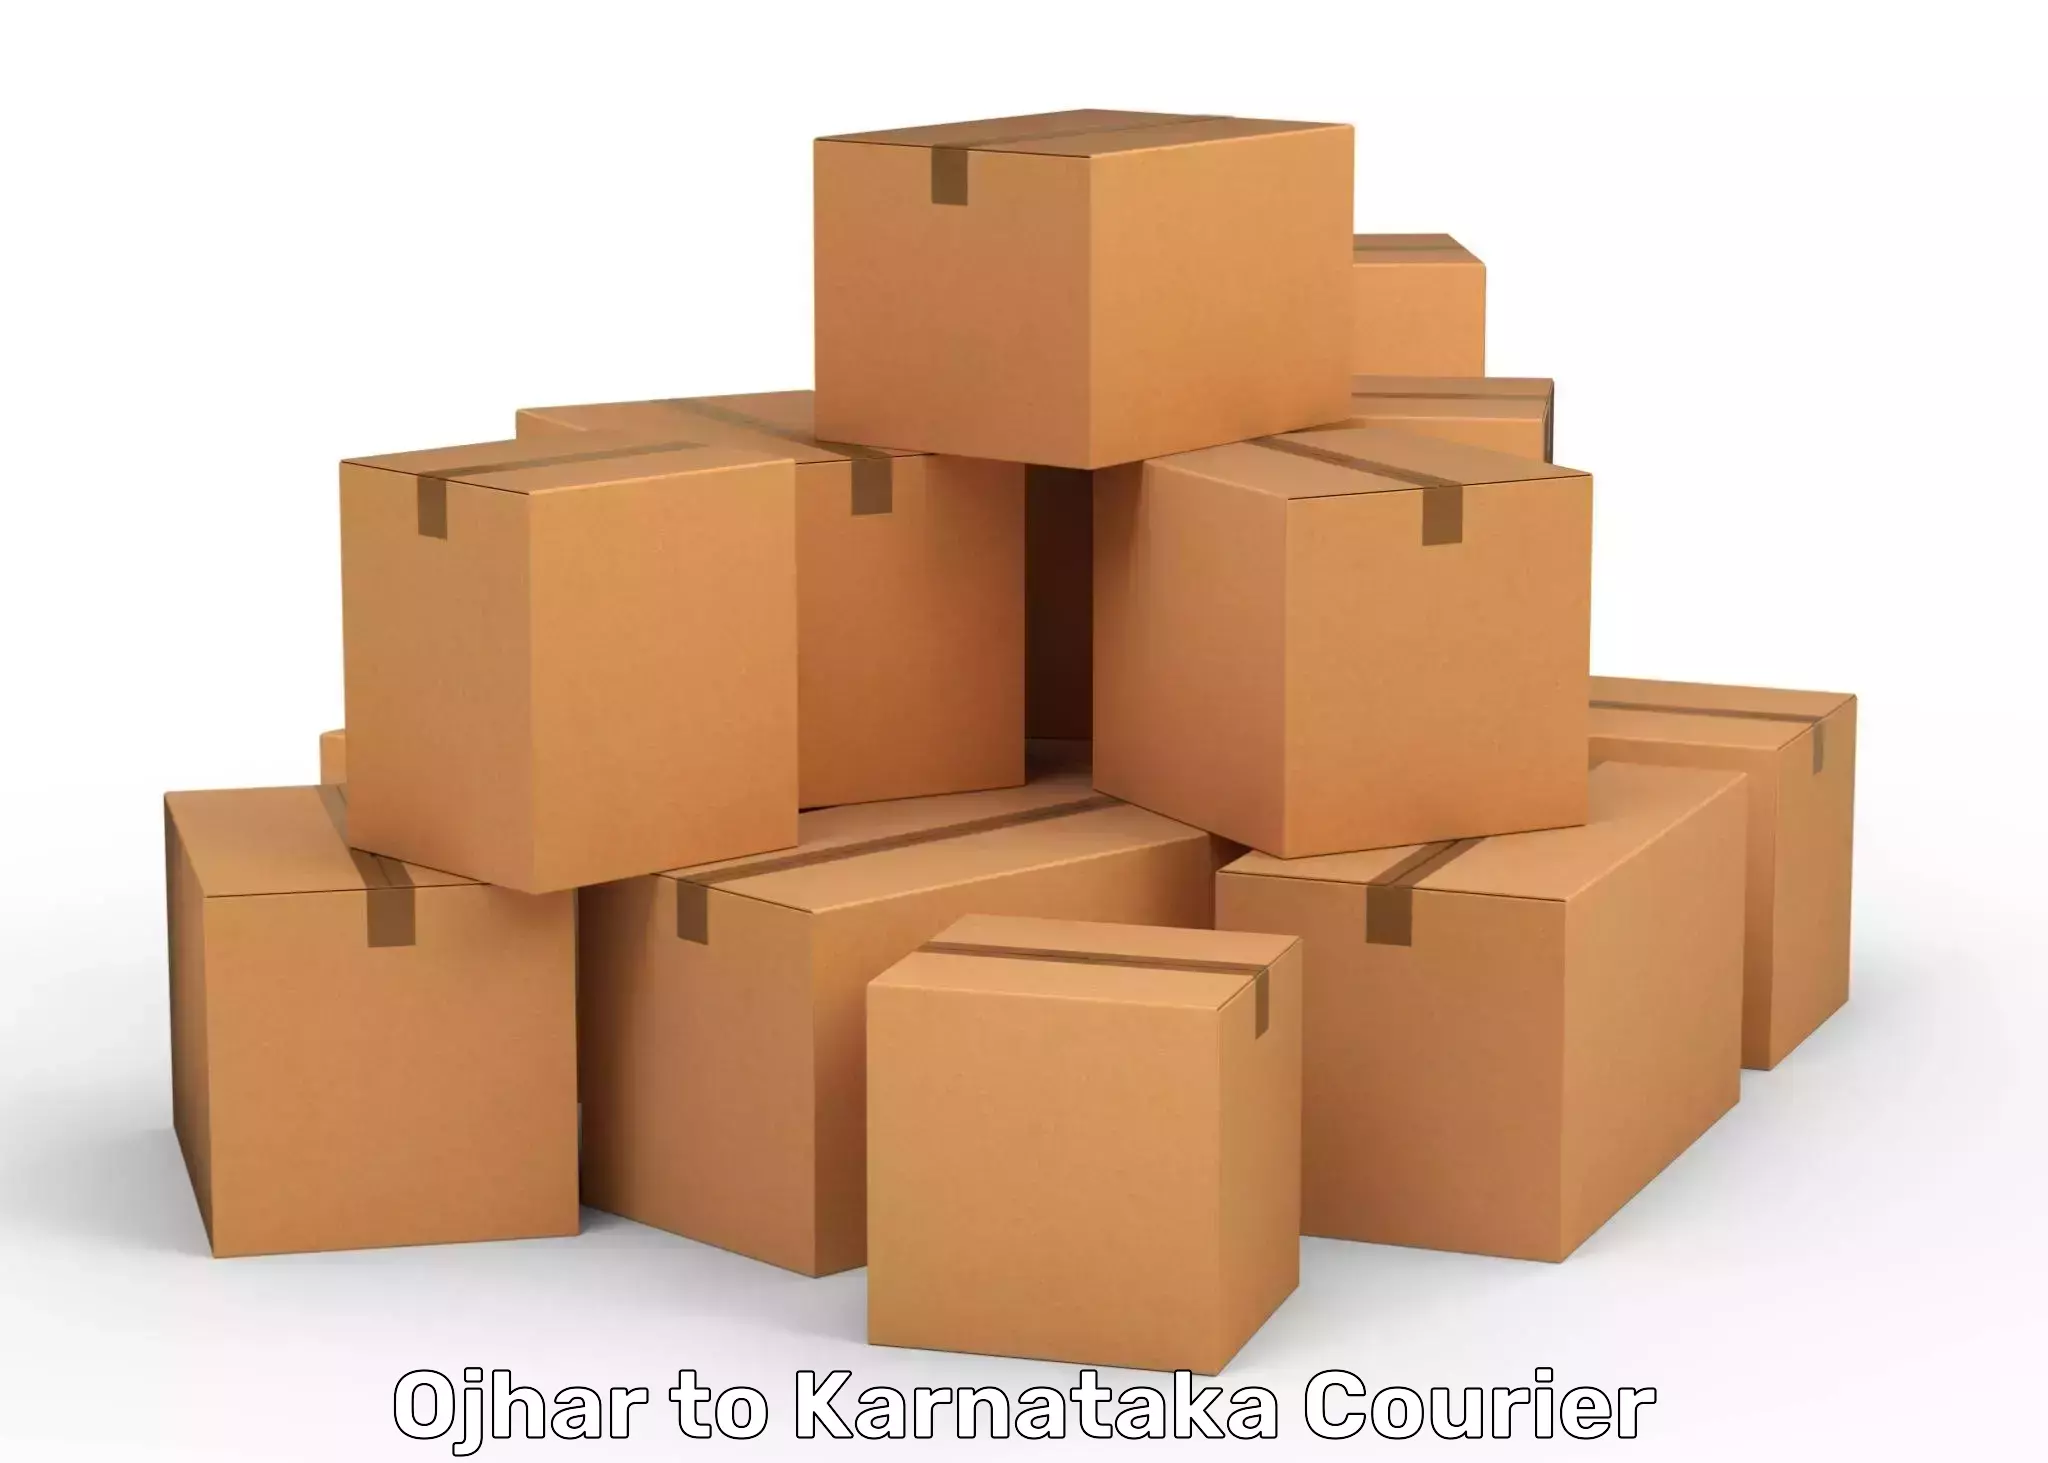 Online courier booking Ojhar to Mangalore Port